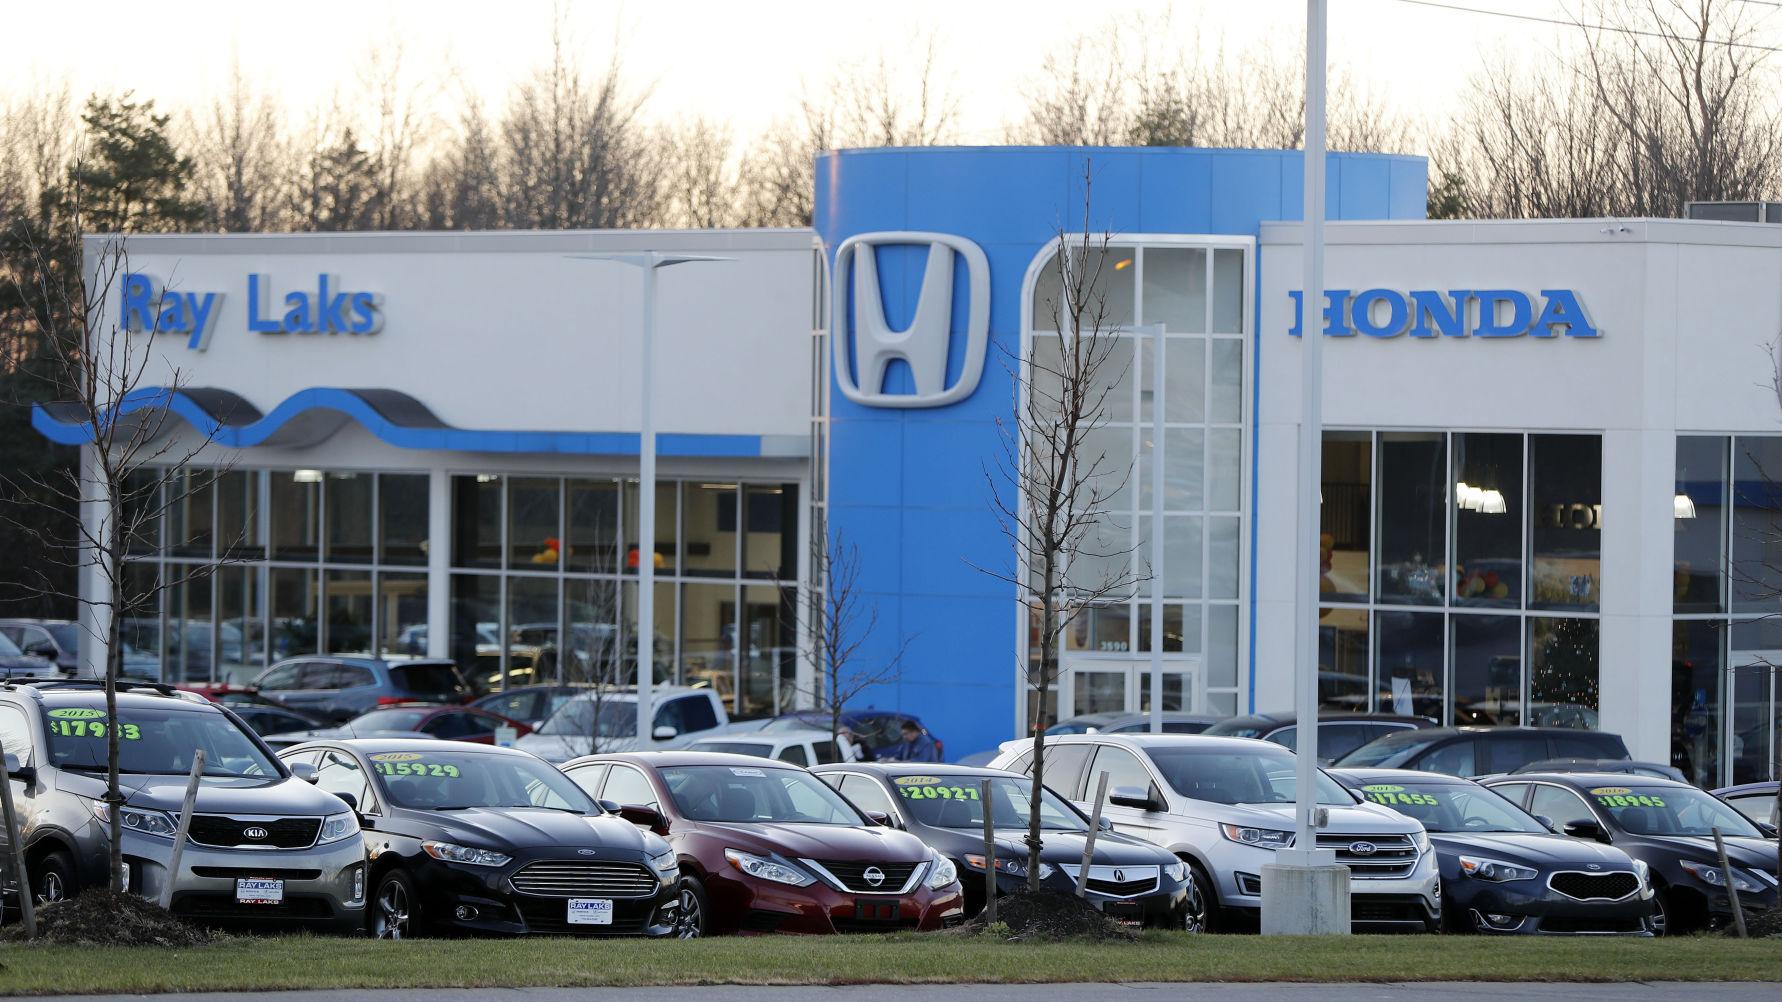 Dealership chain eyes market with Ray purchase | Business | buffalonews.com